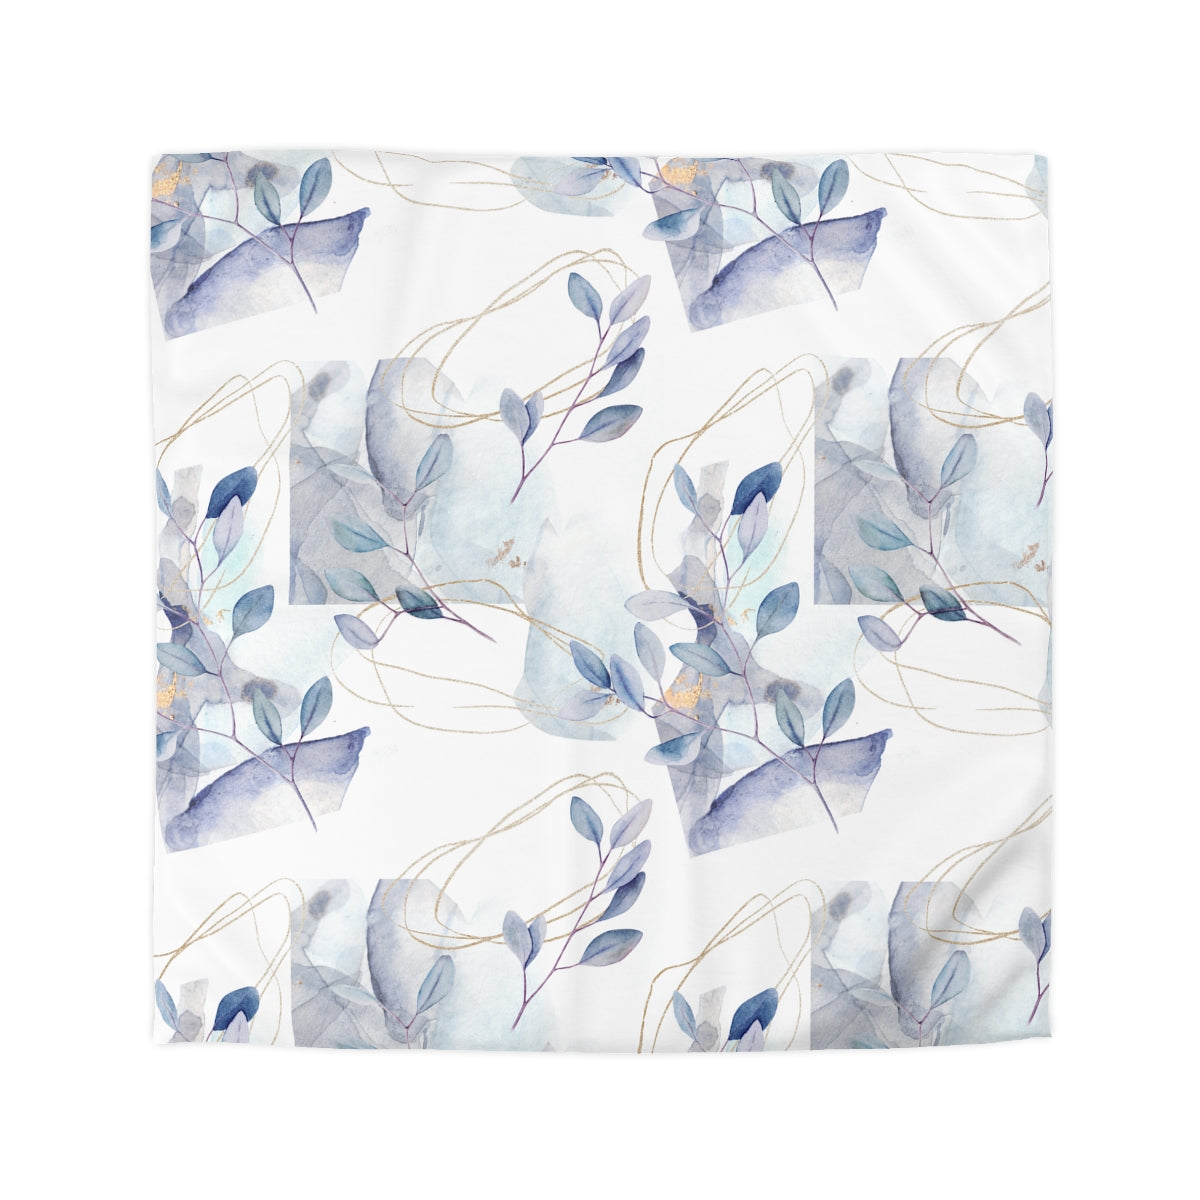 Abstract Floral Branches Microfiber Duvet Cover